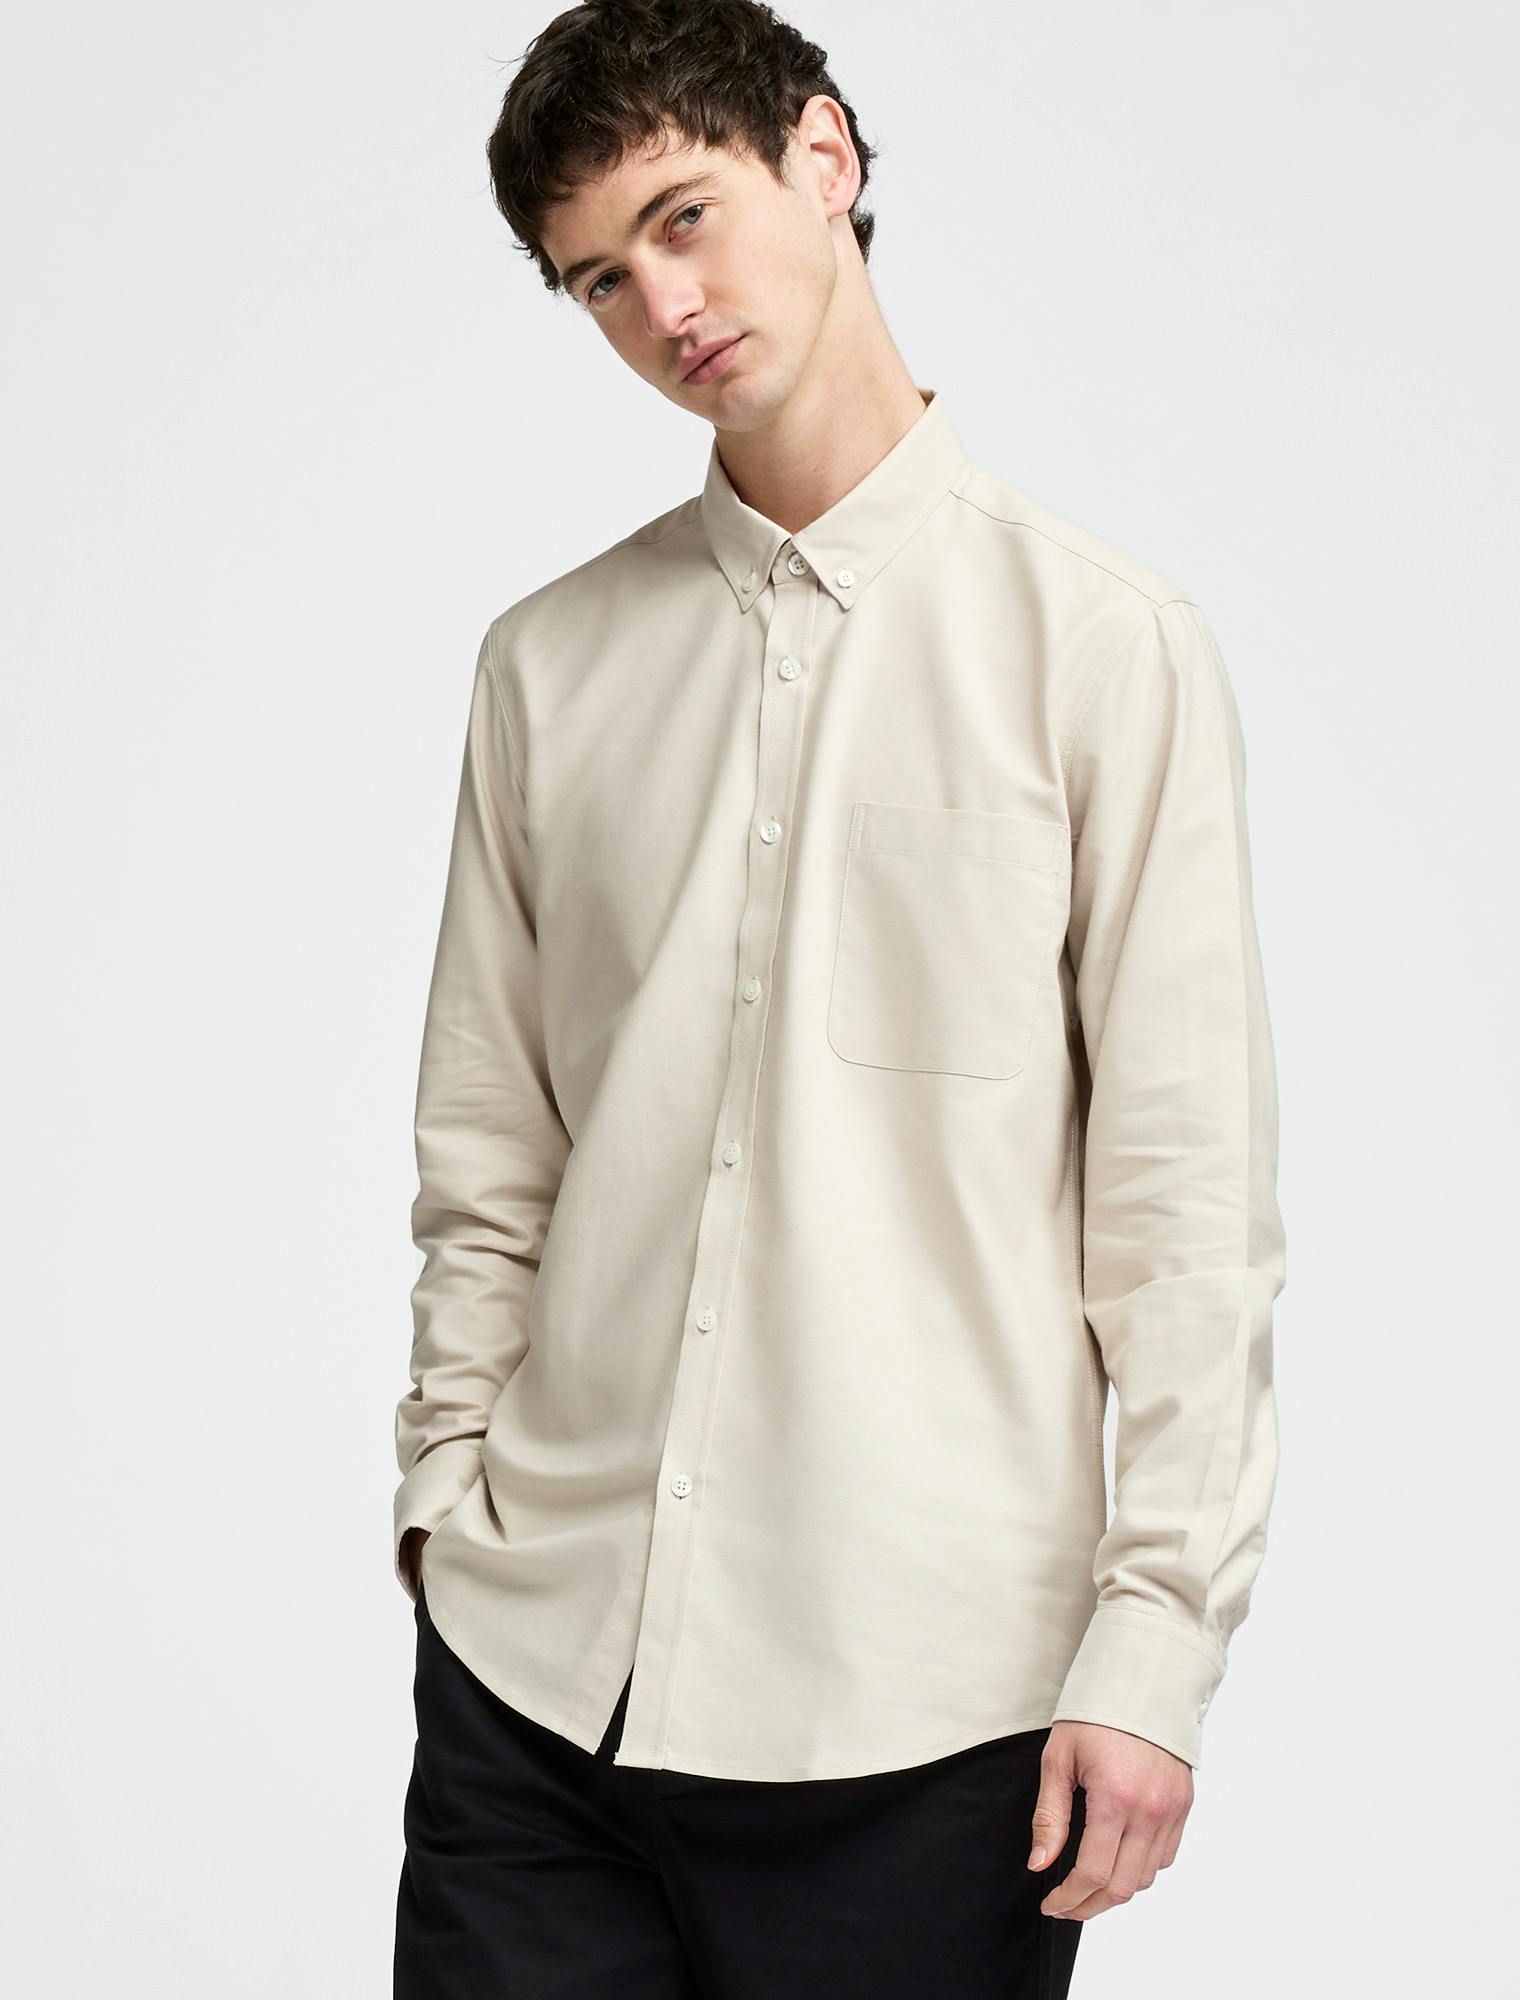 Men's Smith Oxford Long Sleeve Shirt in Oatmeal cotton